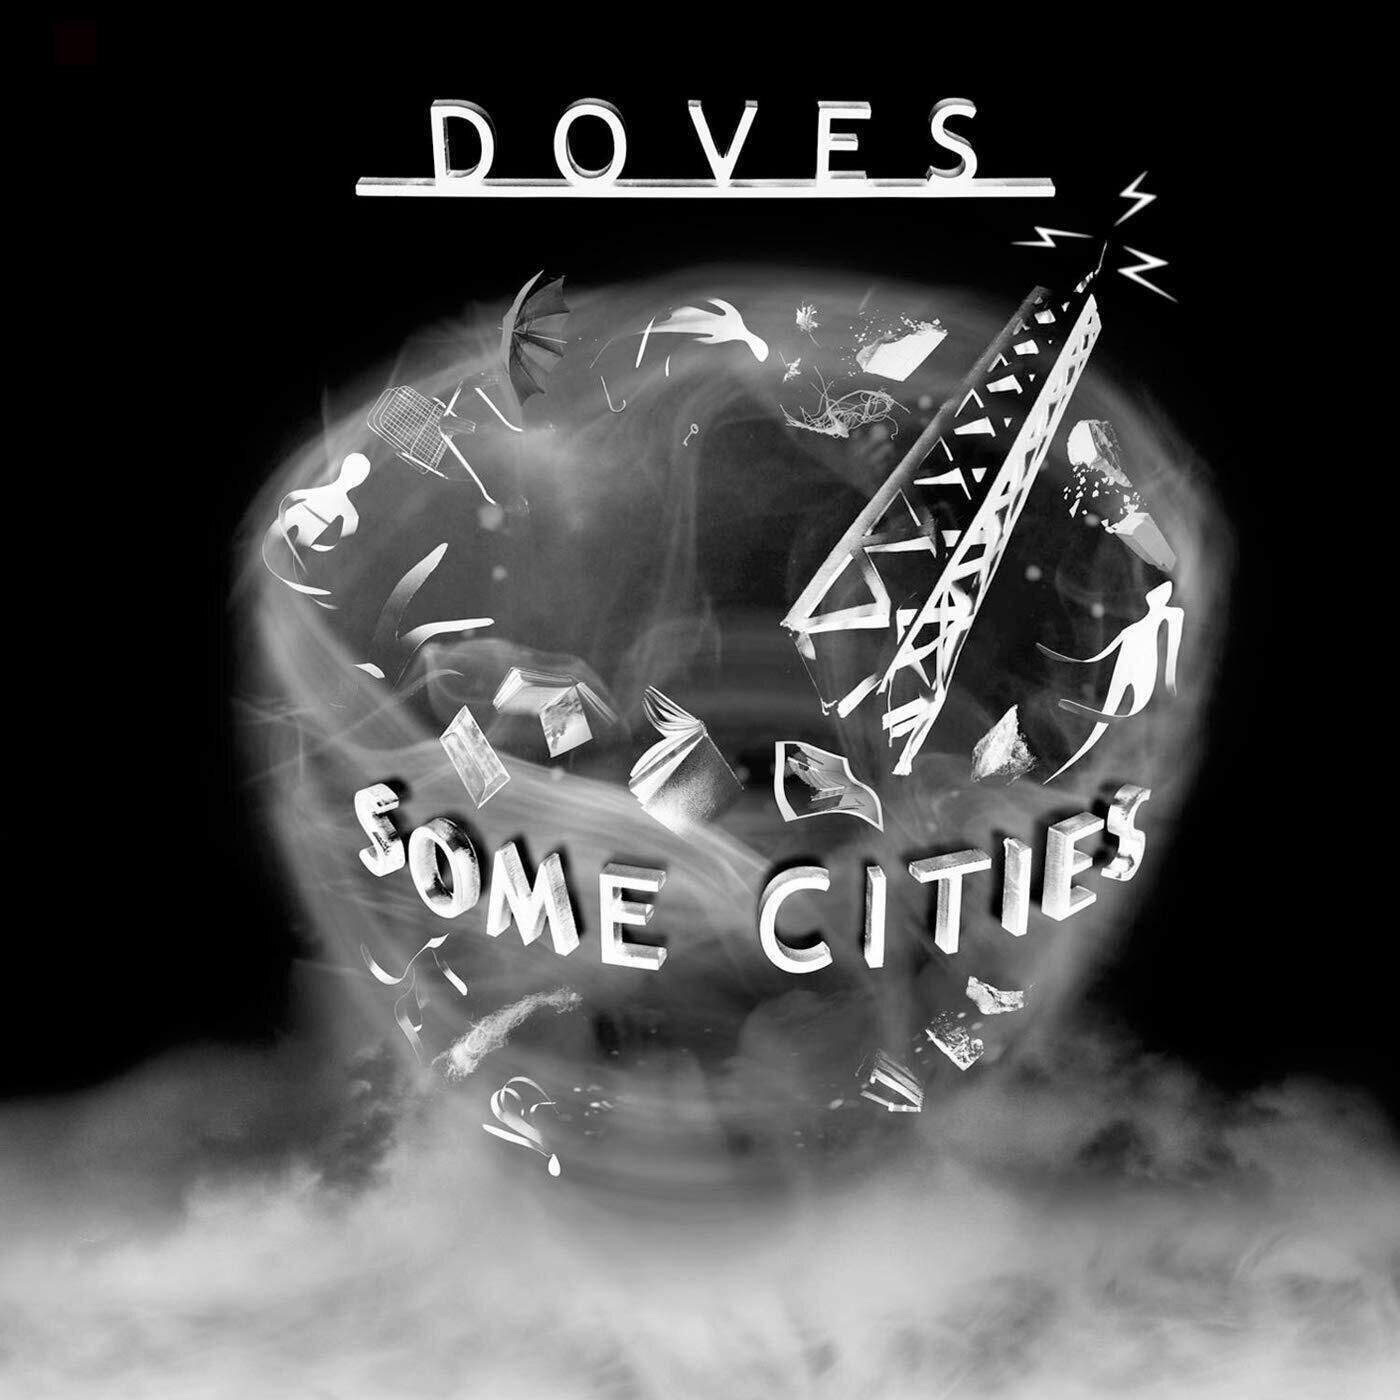 Doves - Some Cities (White Coloured) (Limited Edition) (2 LP) Doves